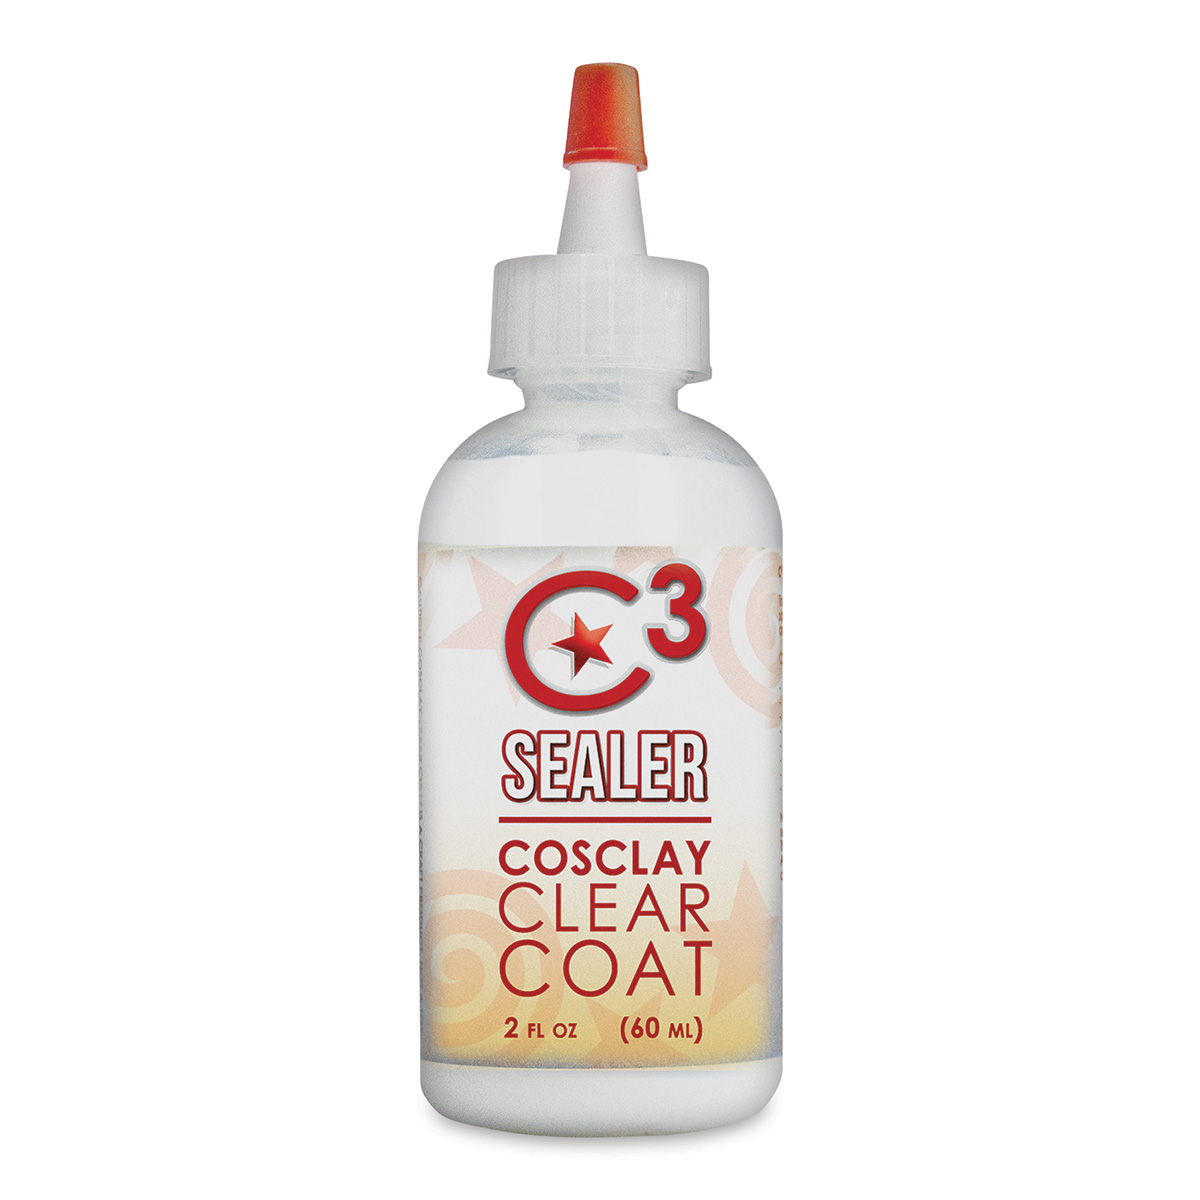 Cosclay C2 Clearbond Oven-Cure Adhesive